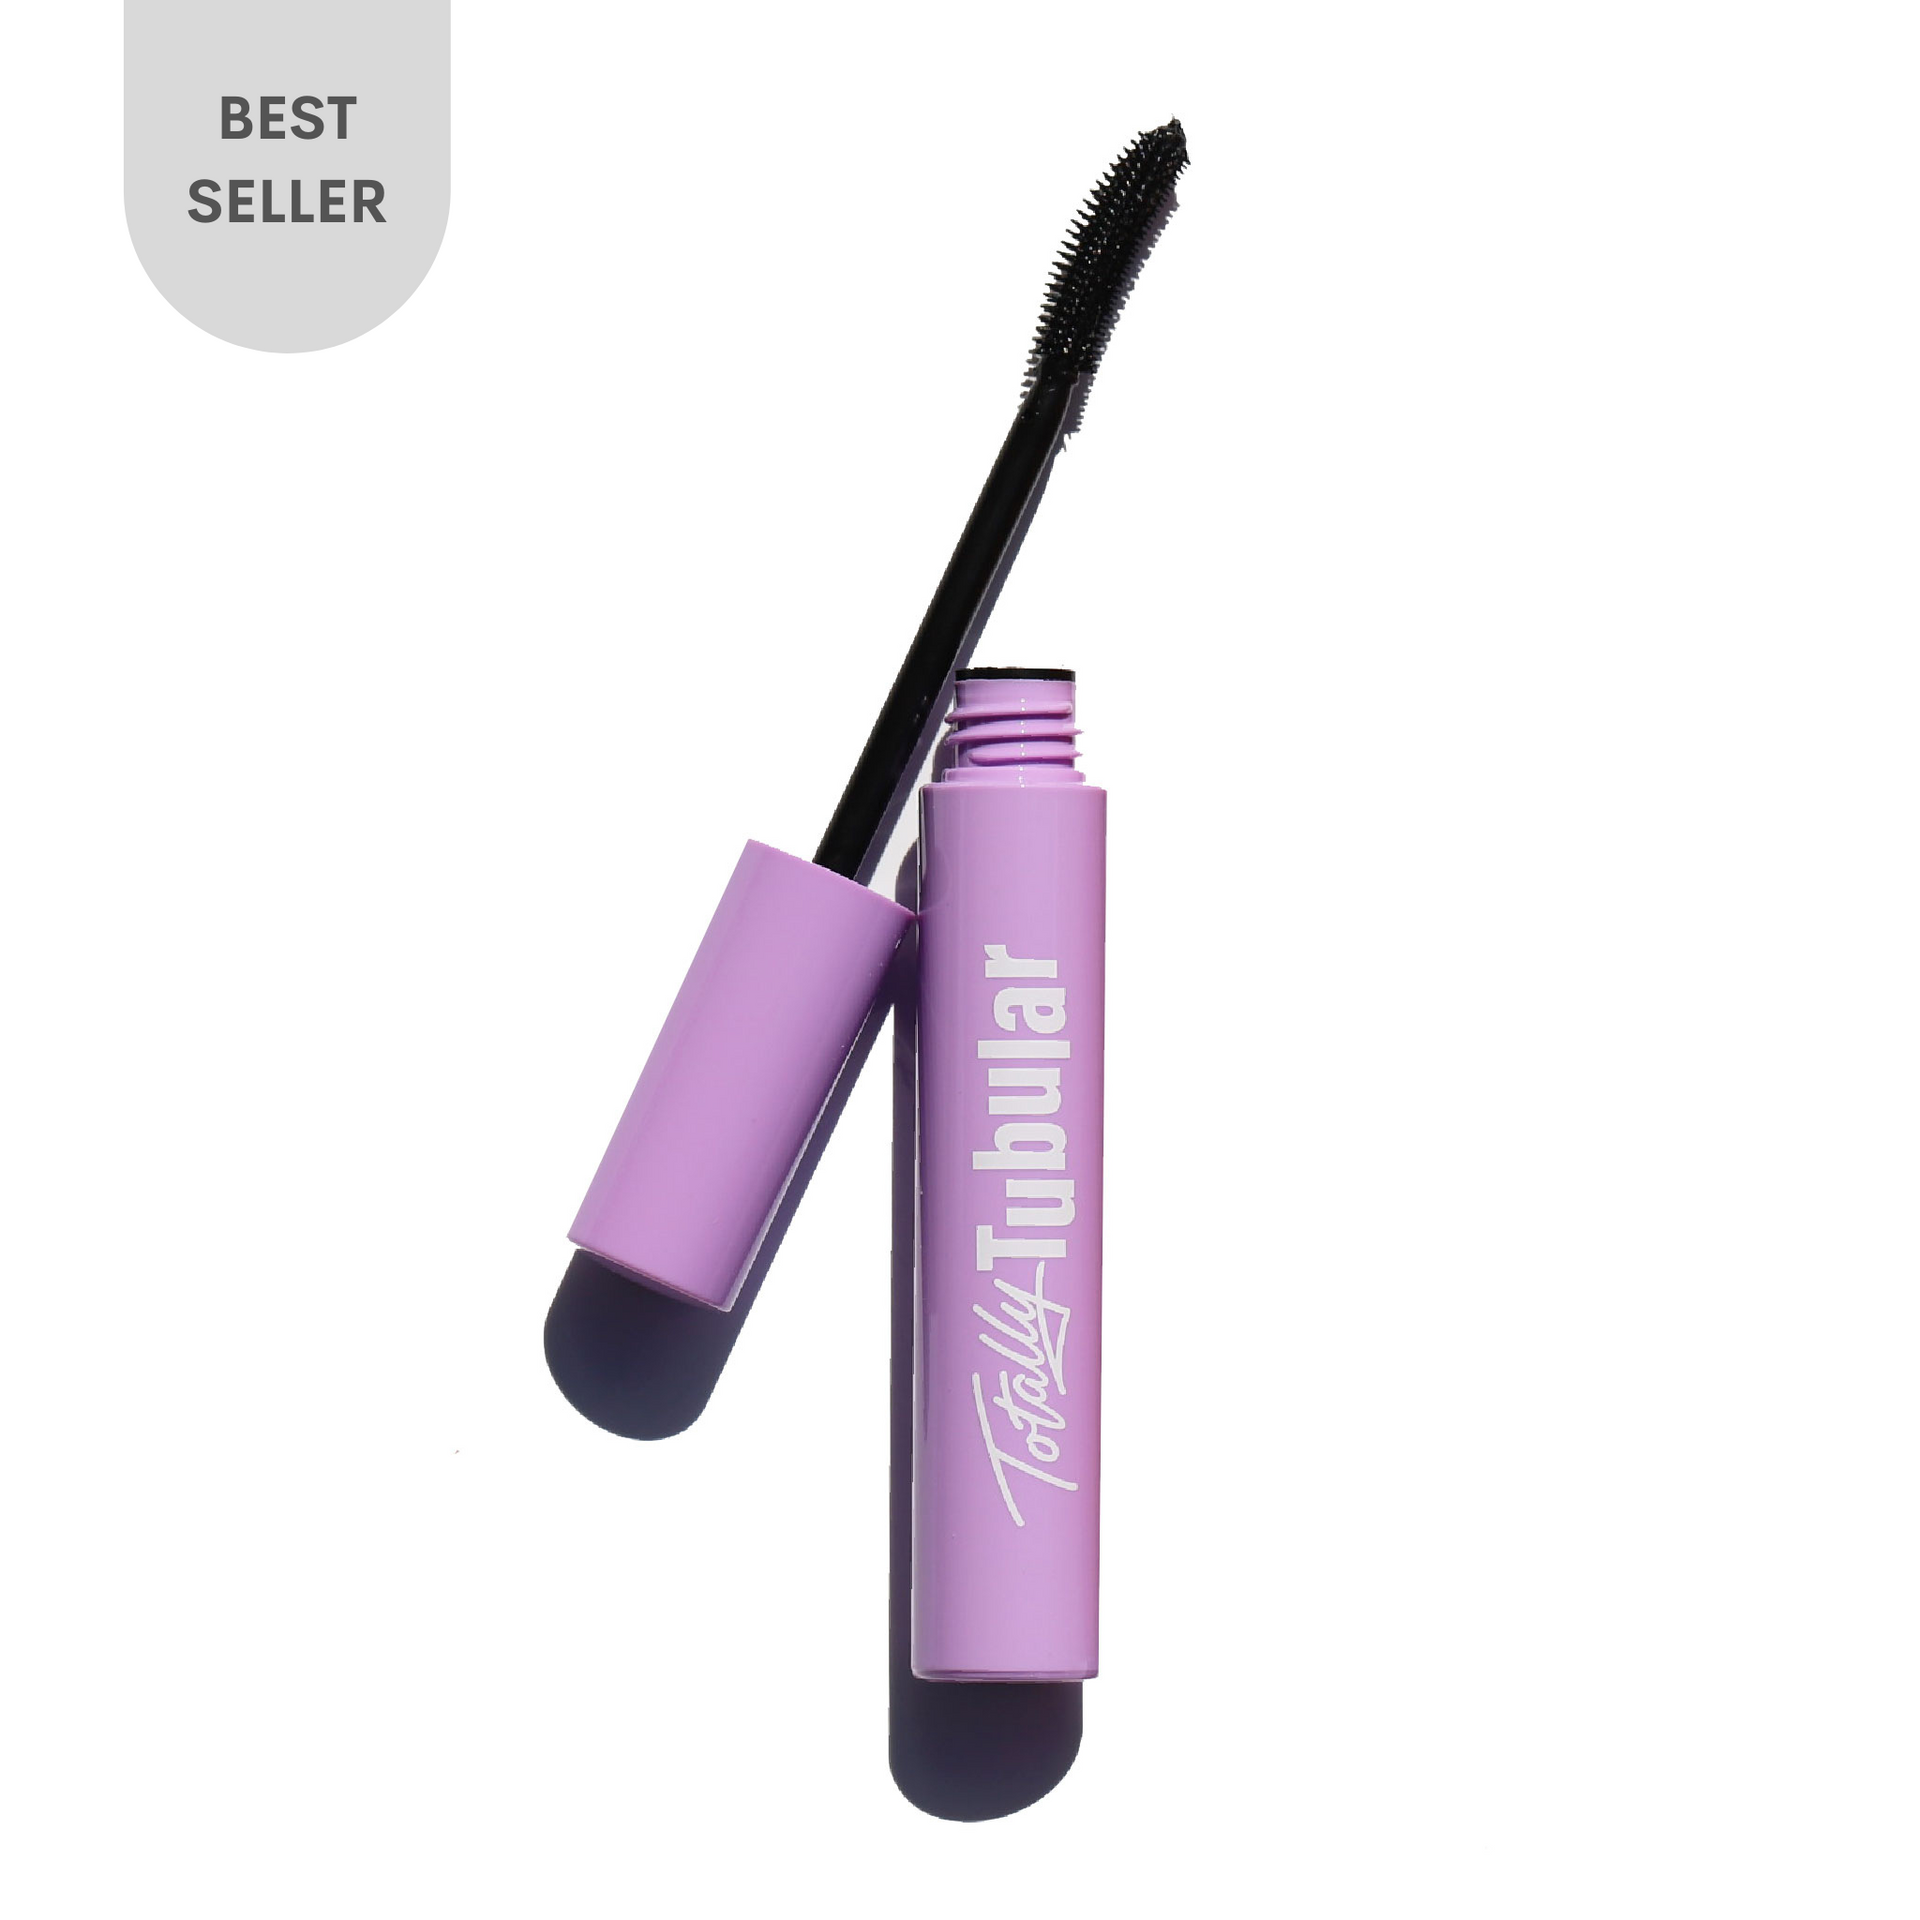 open purple mascara tube with curved black applicator - totally tubular mascara, the ultimate - half caked makeup